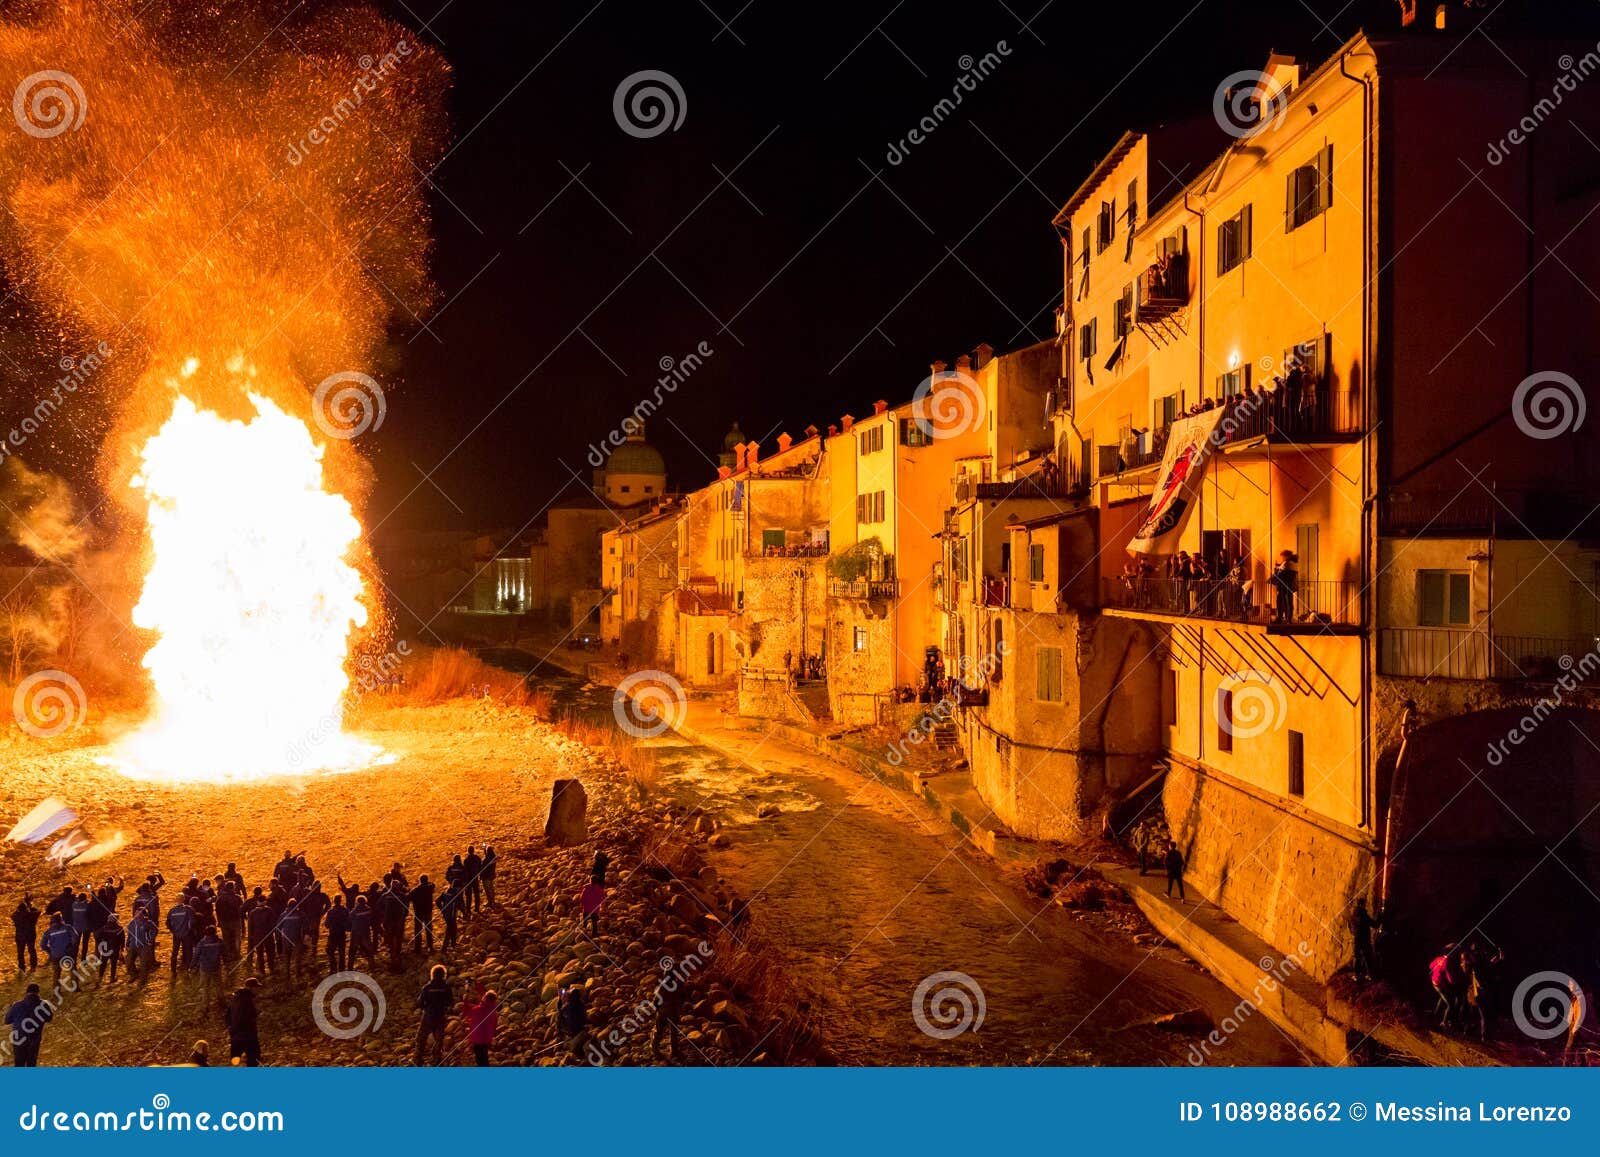 Traditional Winter Bonfire in Pontremoli, Italy Editorial Photography